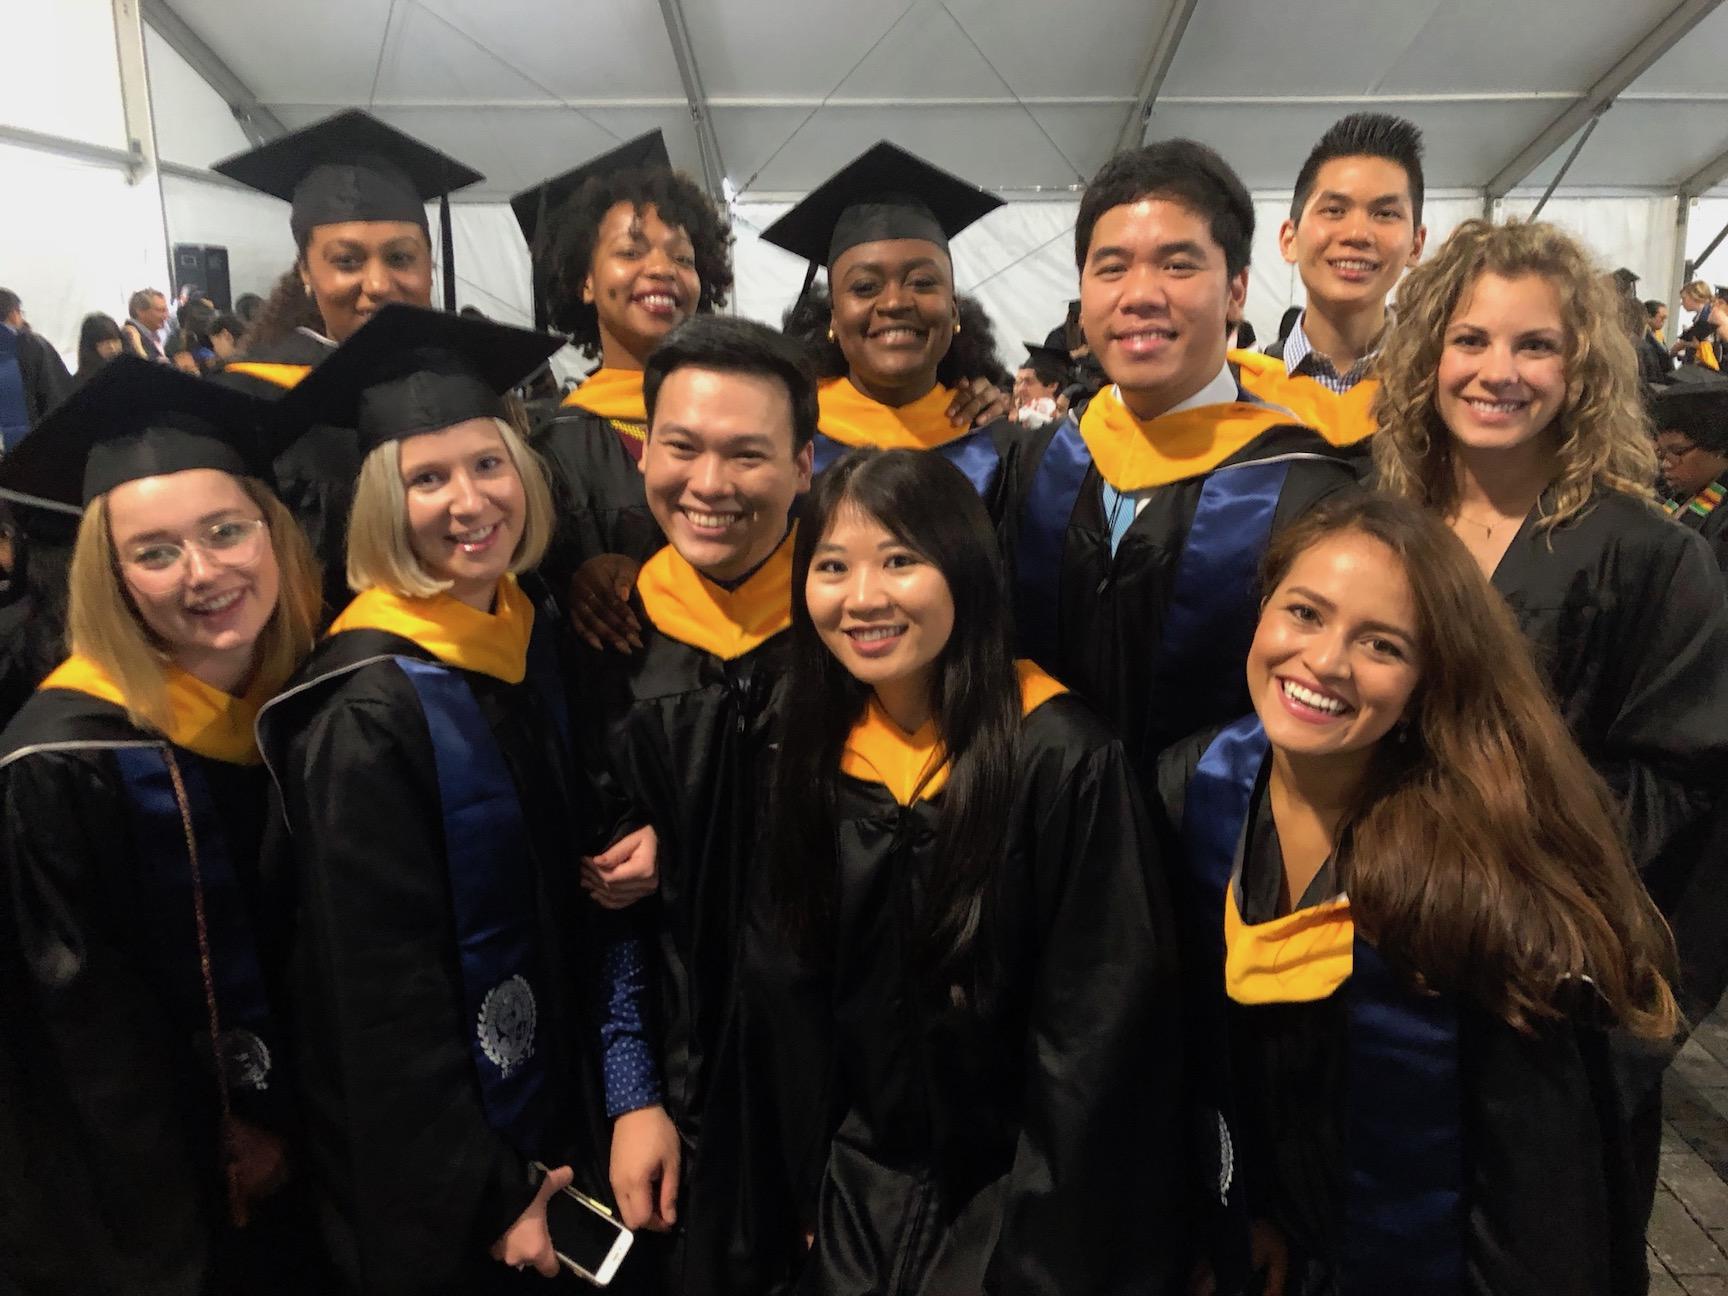 Global Health Students Participating in 2018 Commencement